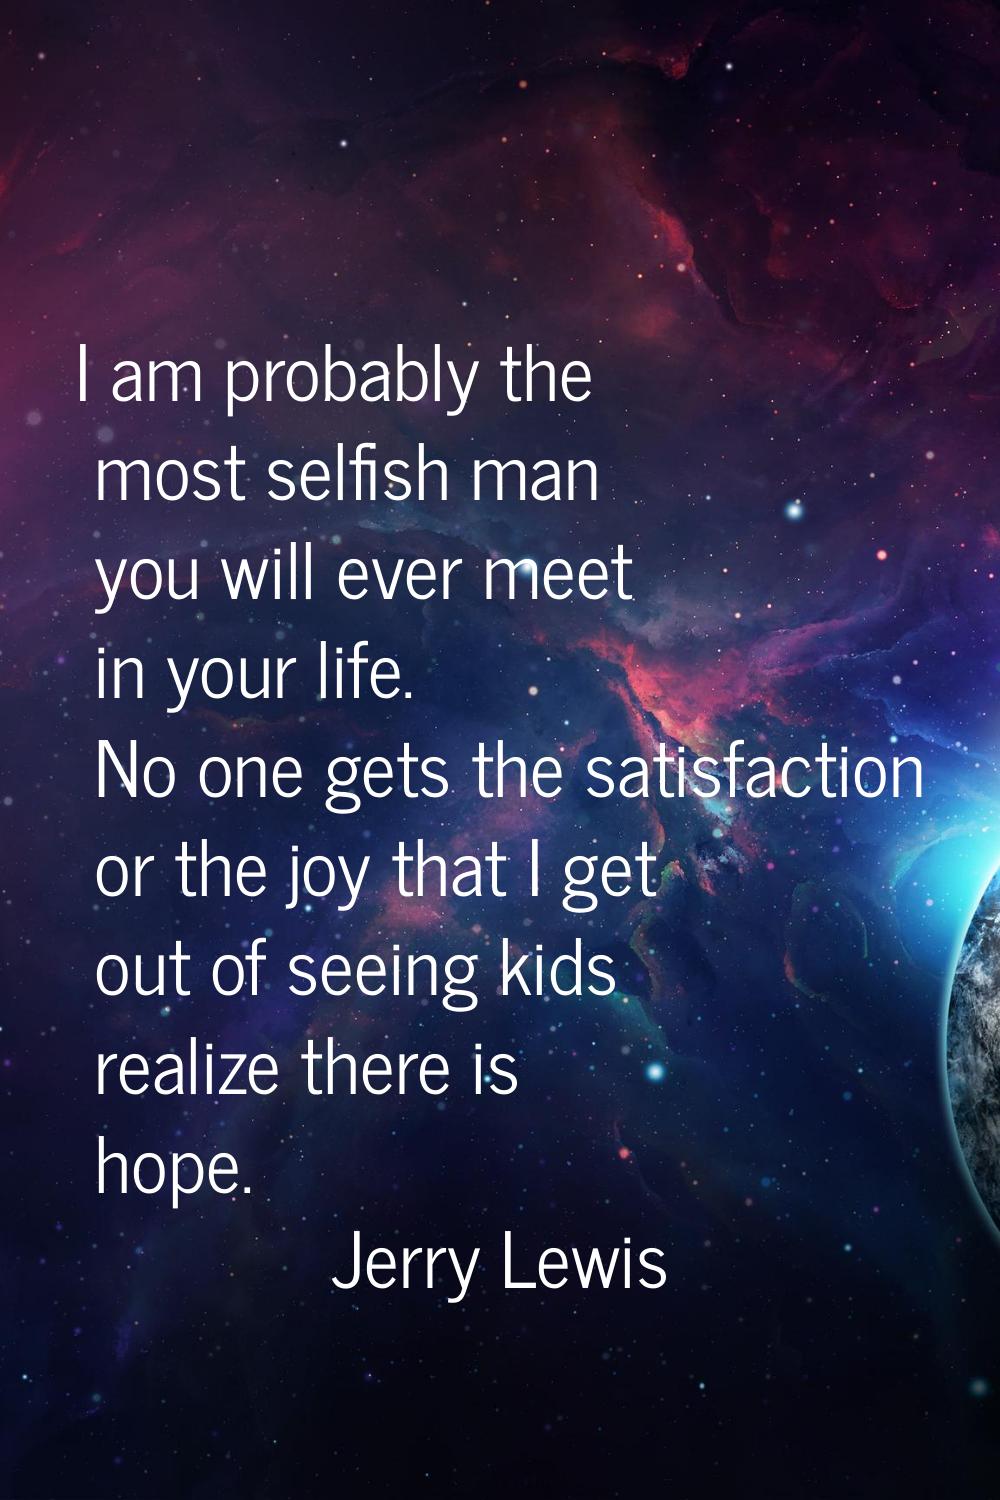 I am probably the most selfish man you will ever meet in your life. No one gets the satisfaction or